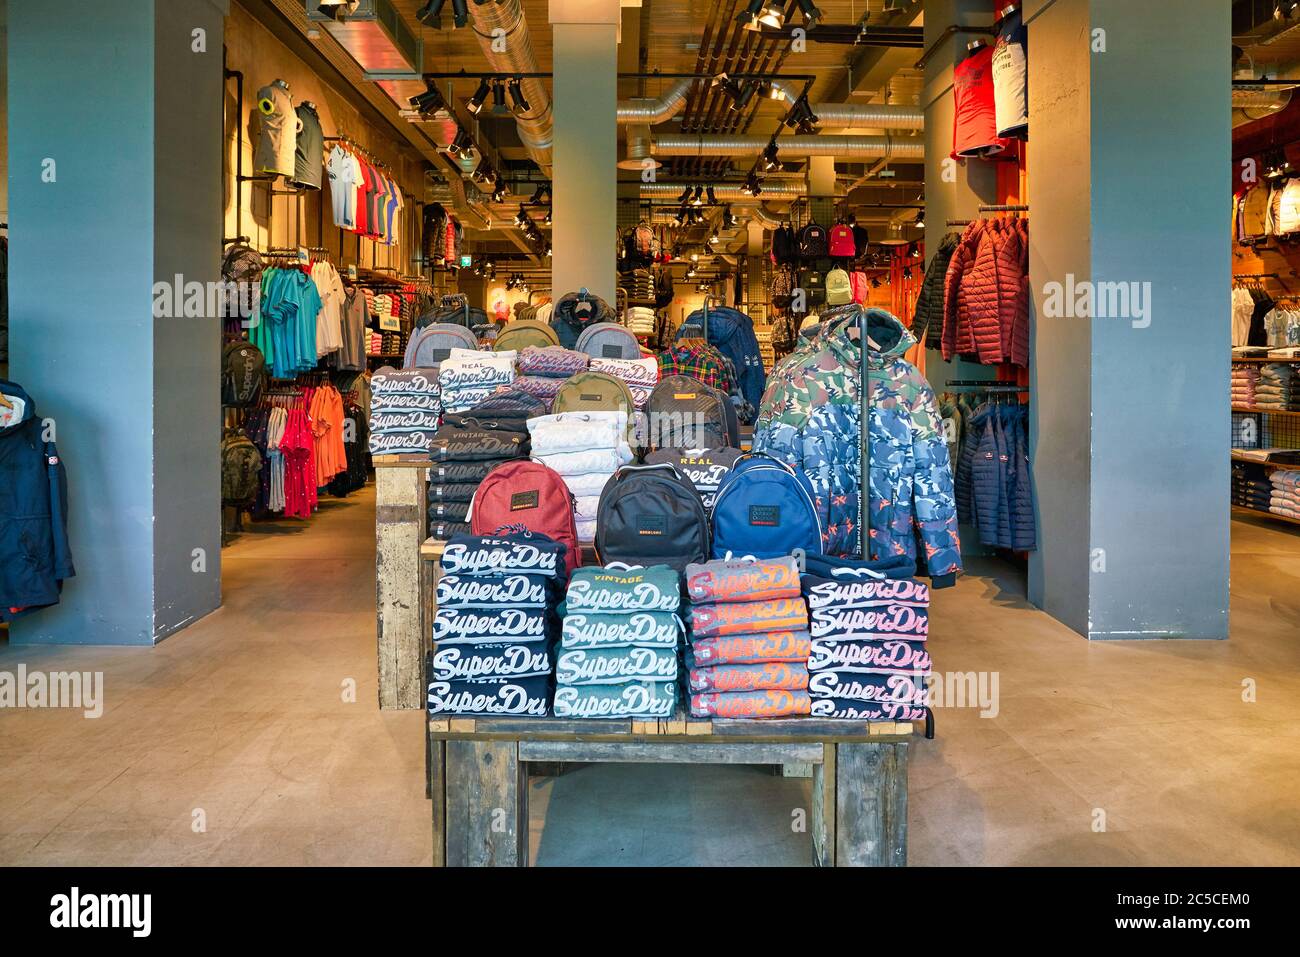 Superdry store hi-res and images - Page 3 - Alamy